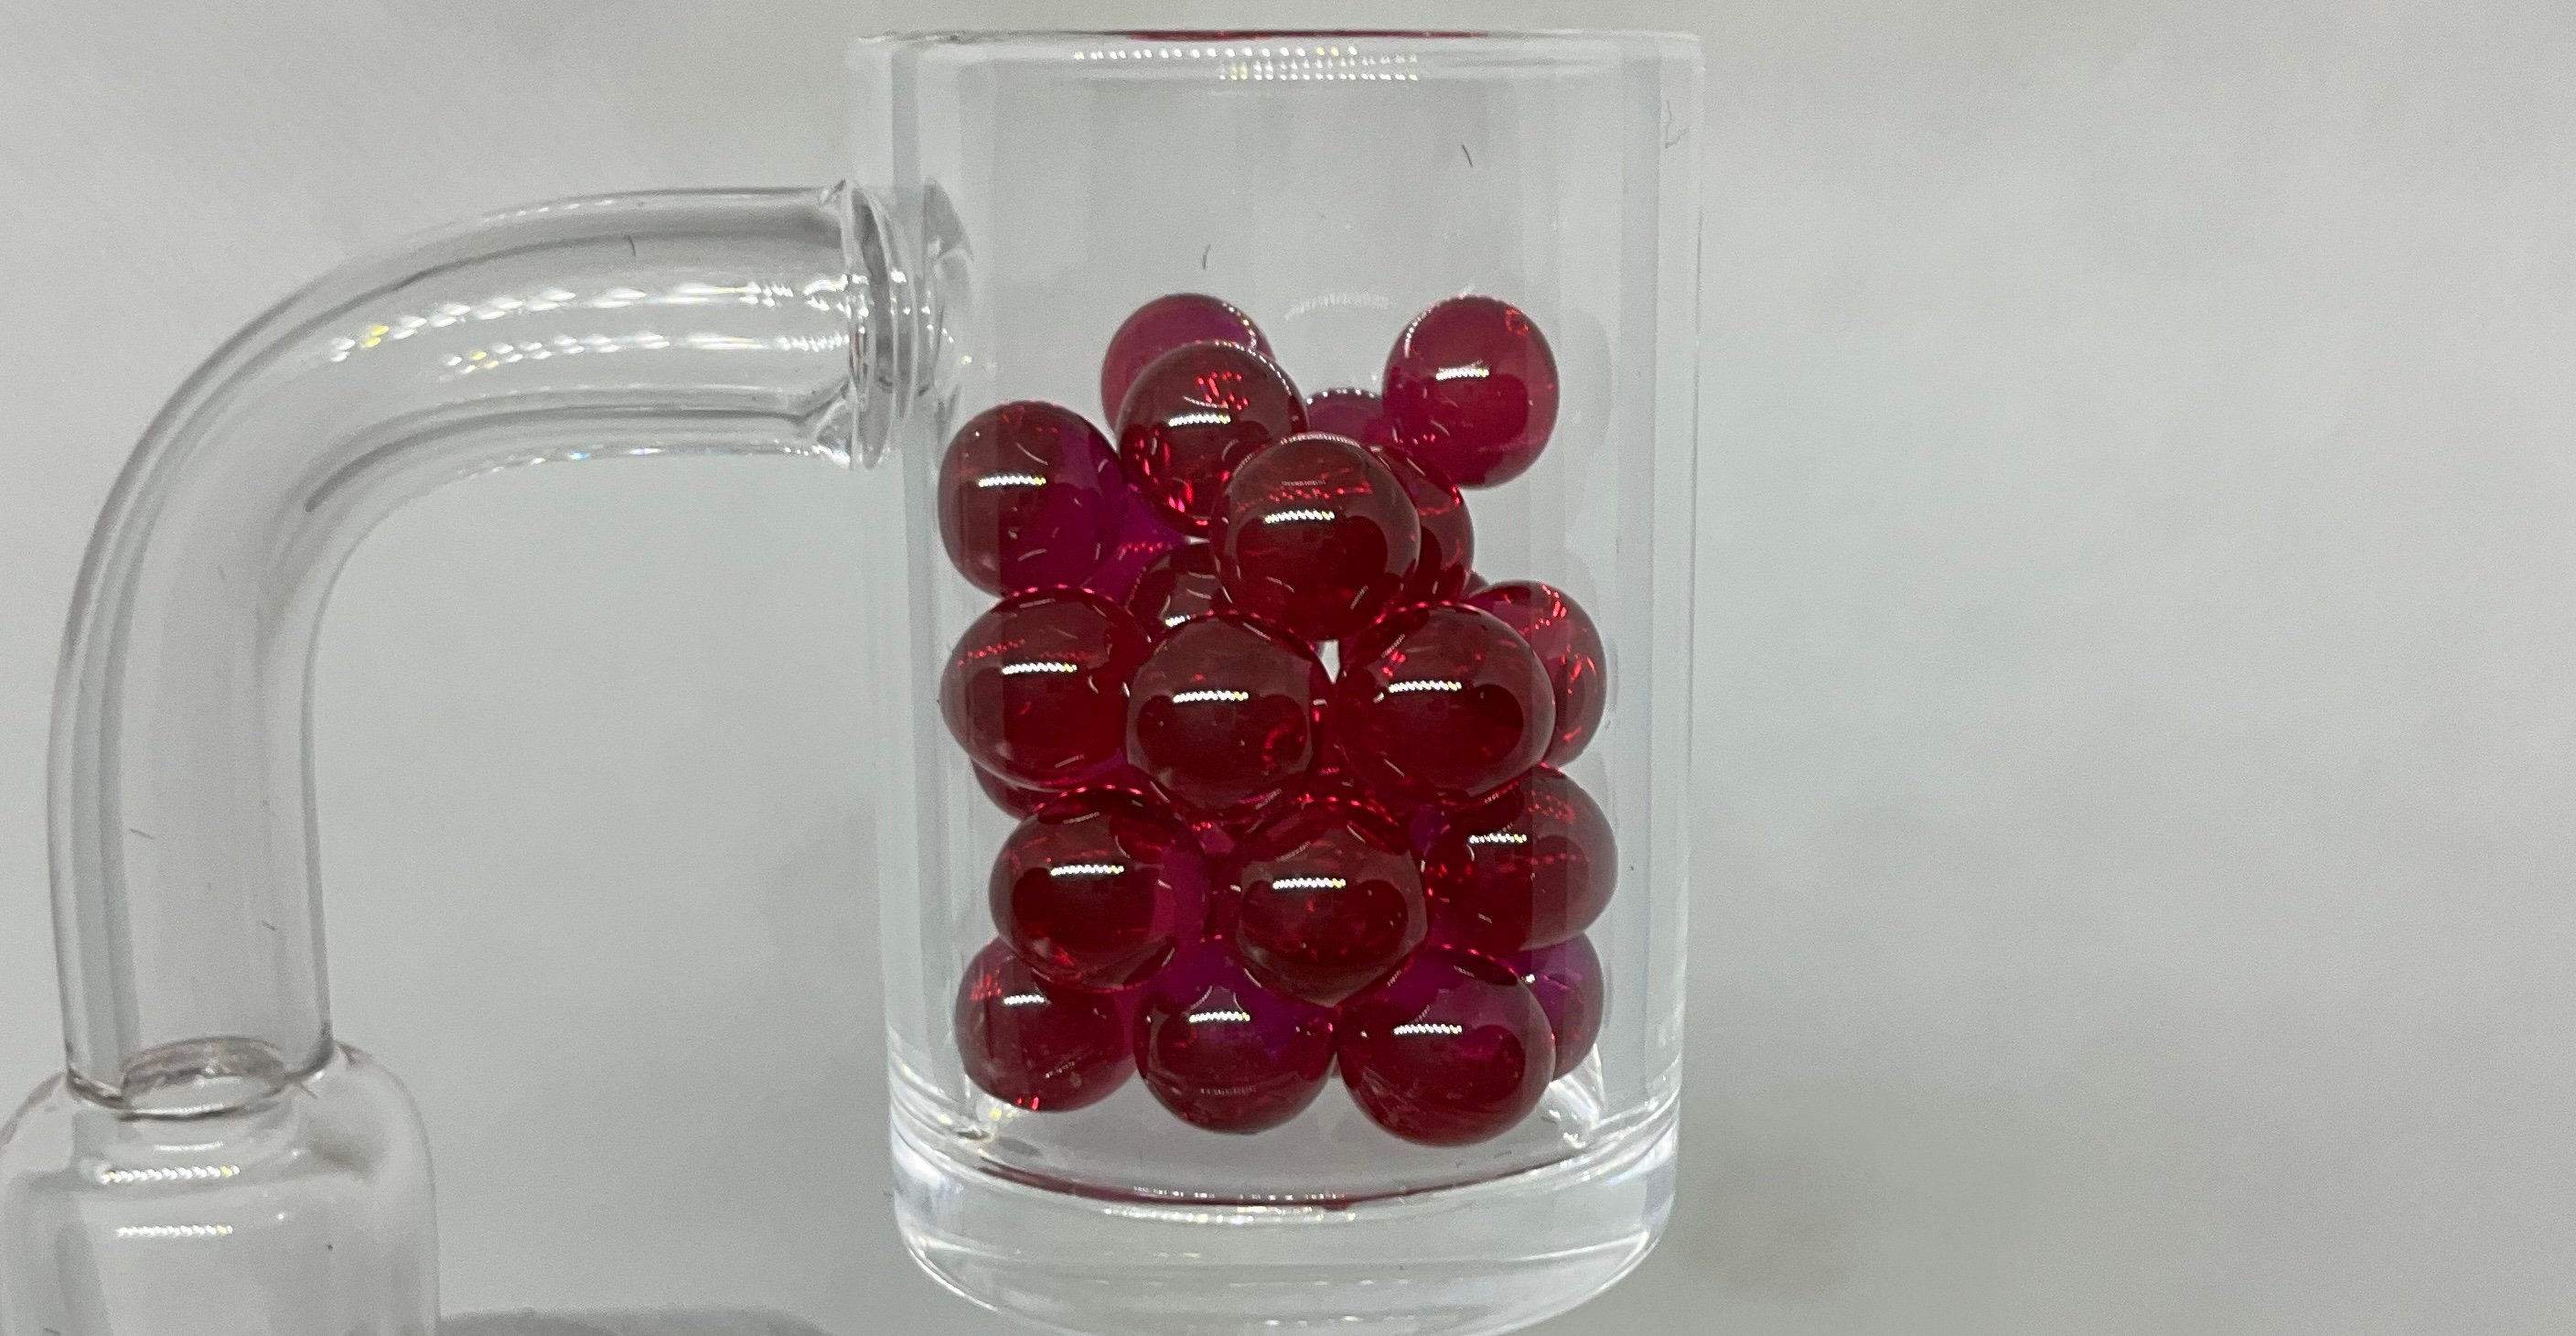 6mm Ruby Terp Pearls – Max Quality Glass